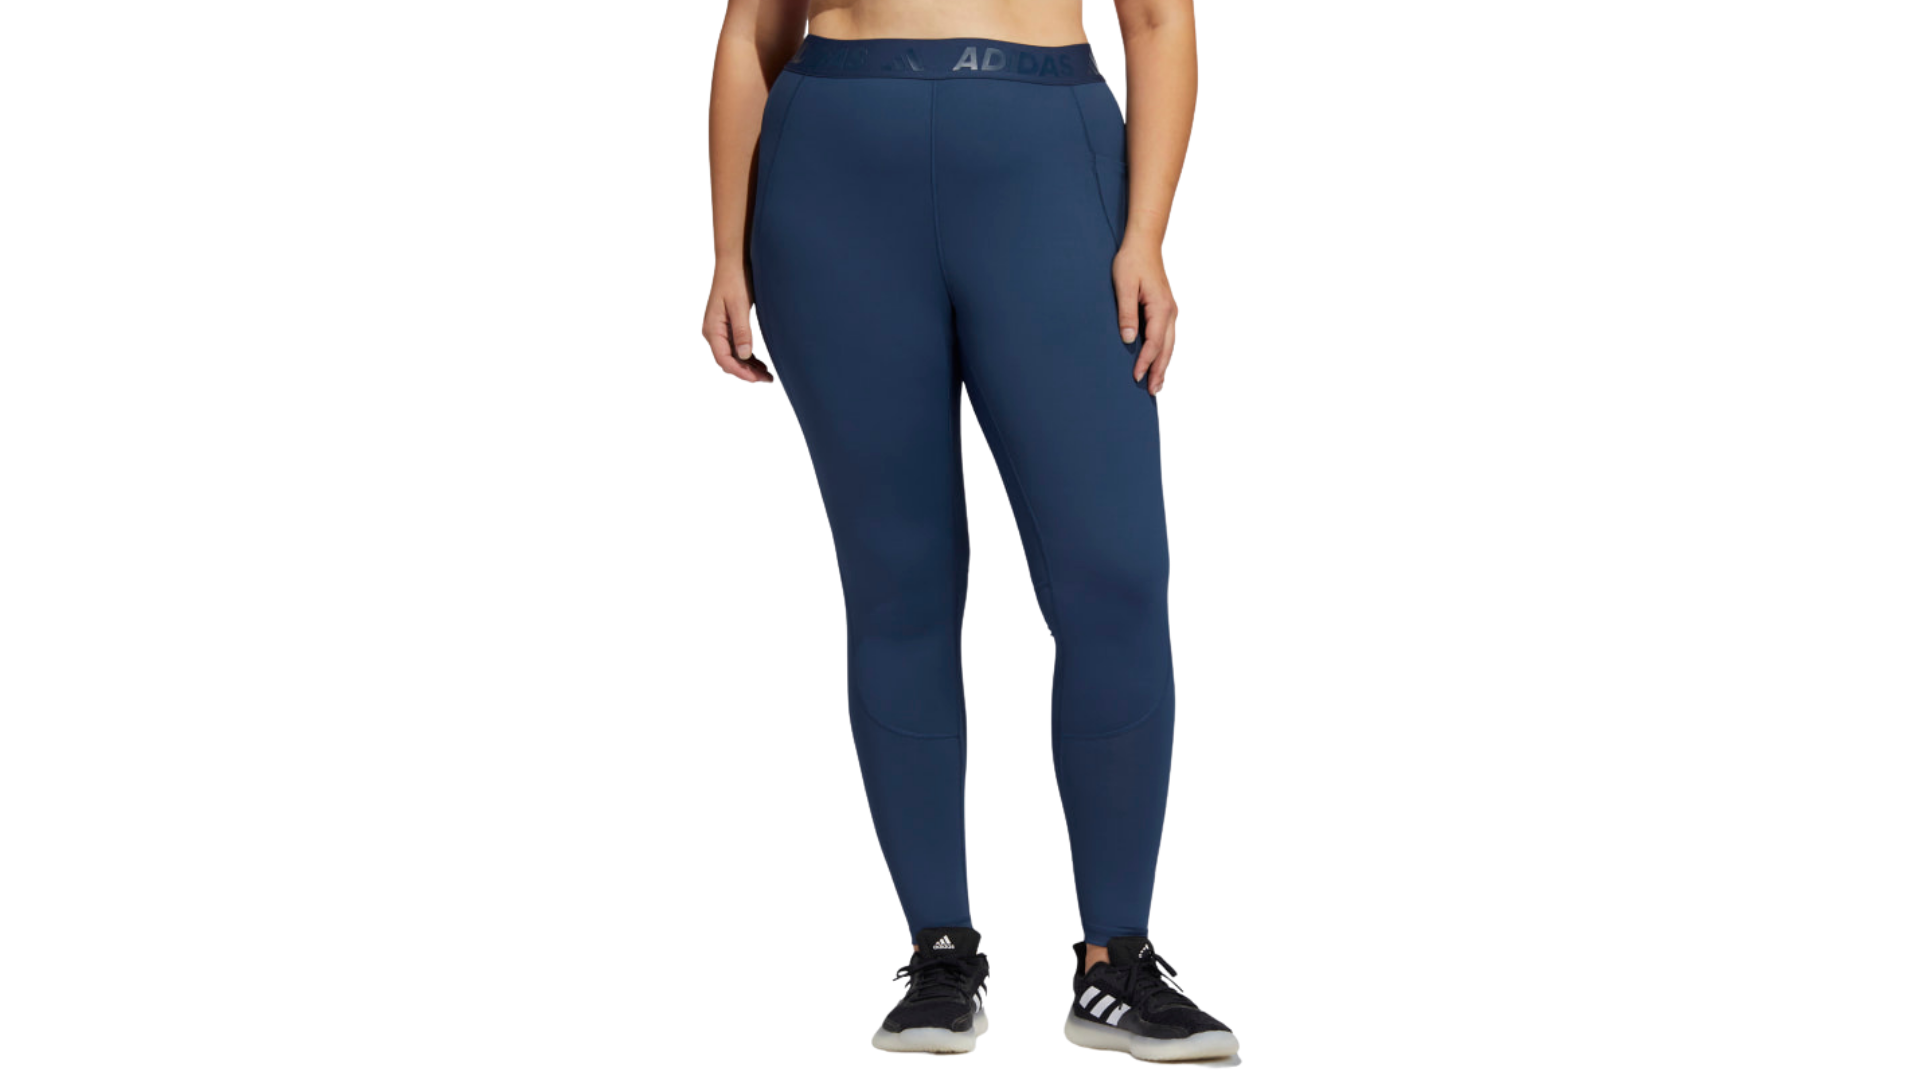 Adidas best plus size leggings with pockets